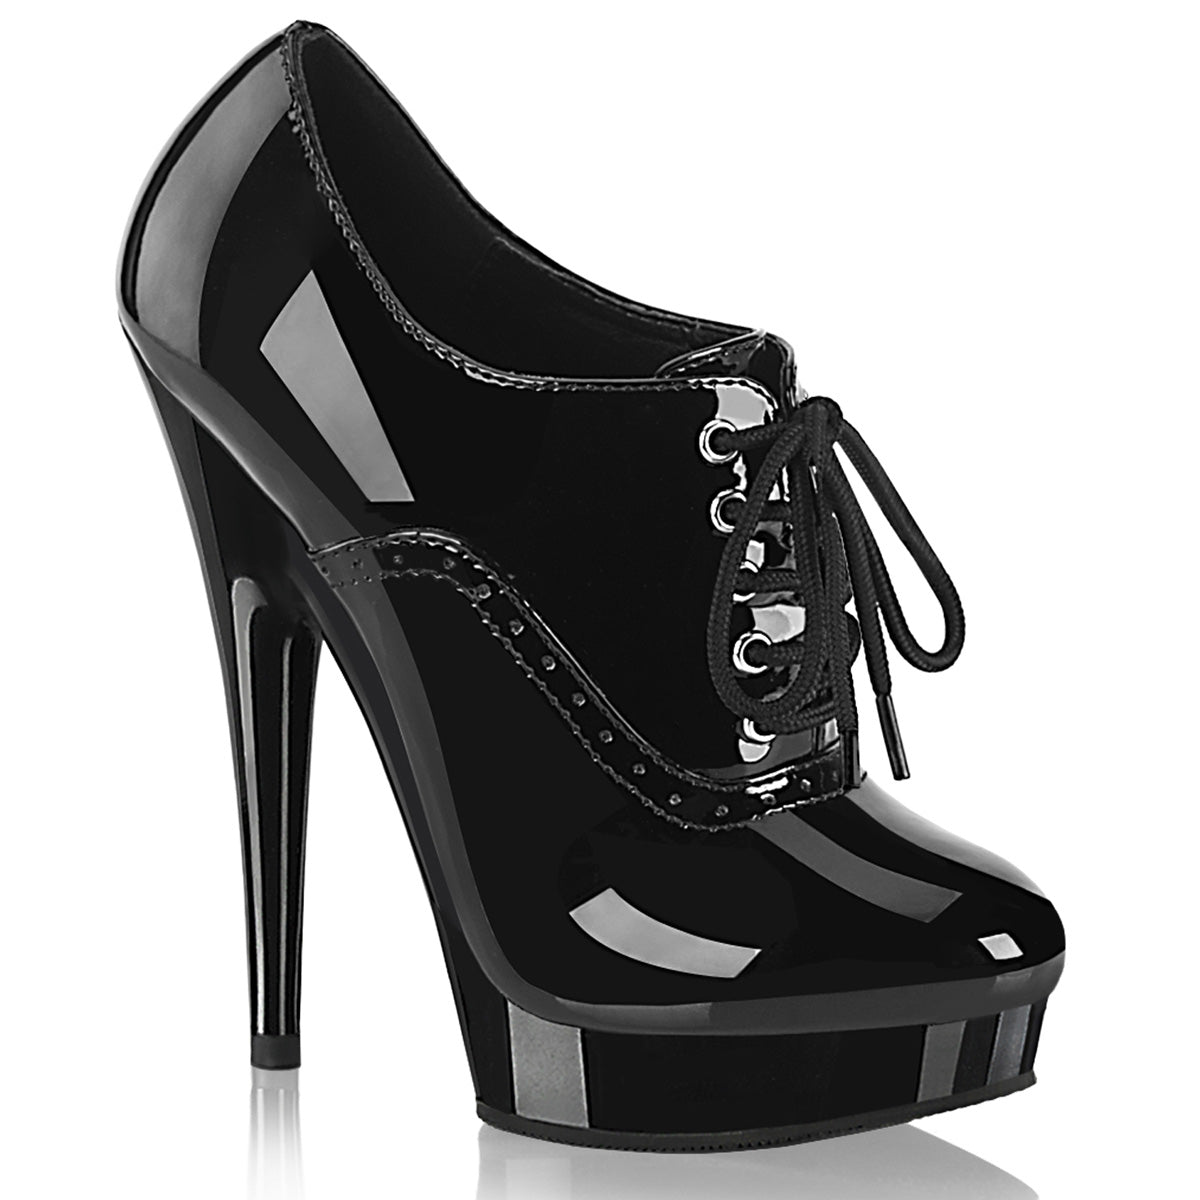 SULTRY-660 Black Patent/Black Fabulicious